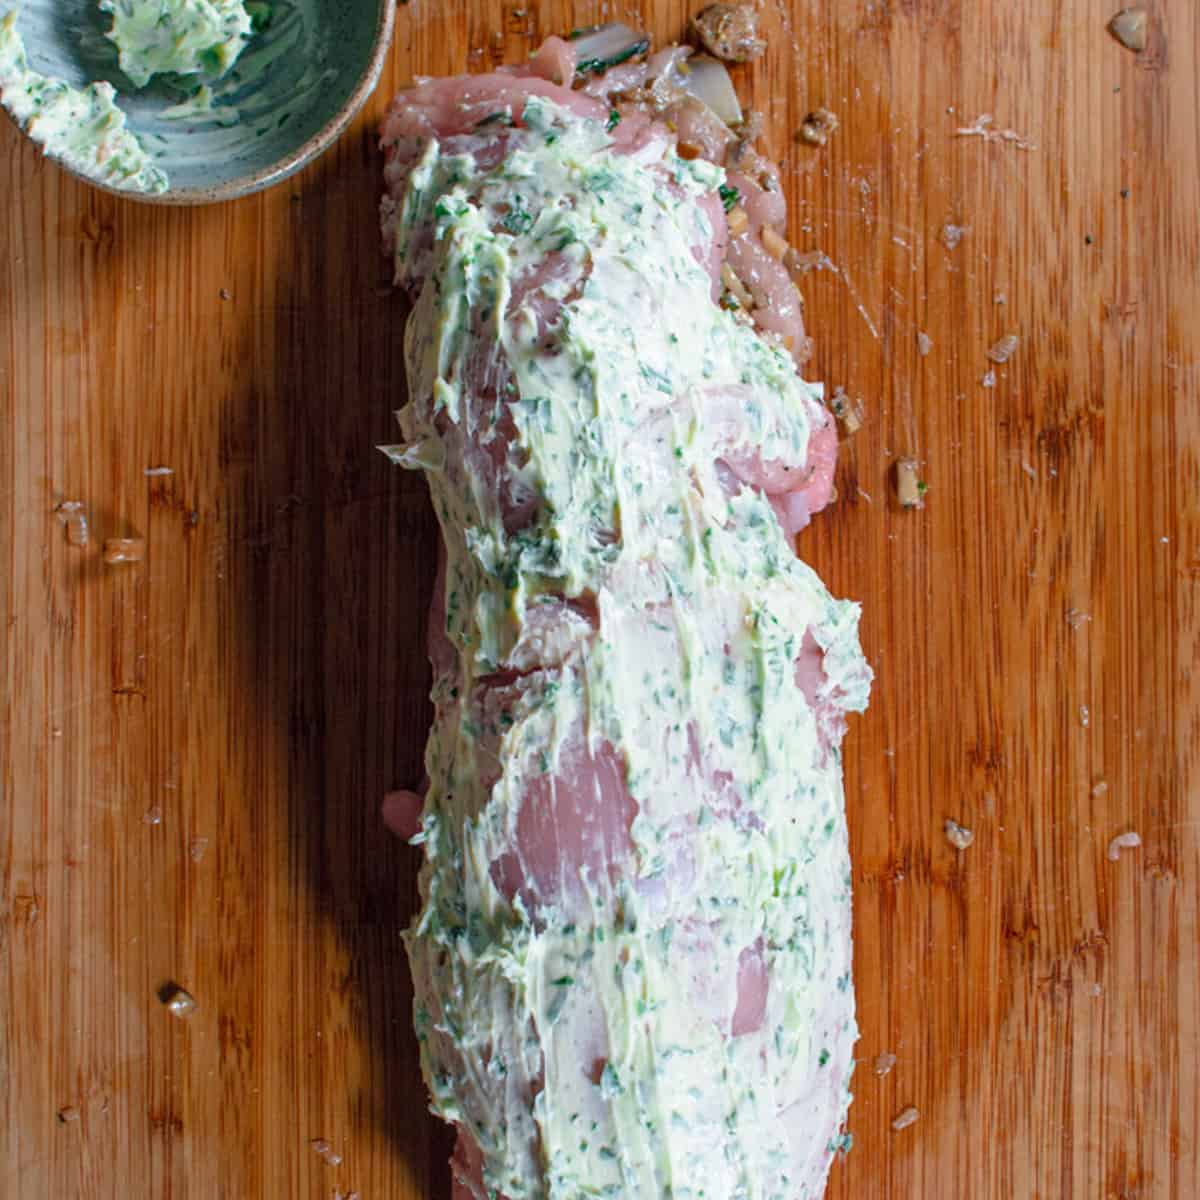 parsley butter is evenly spread over the rolled up turkey breast